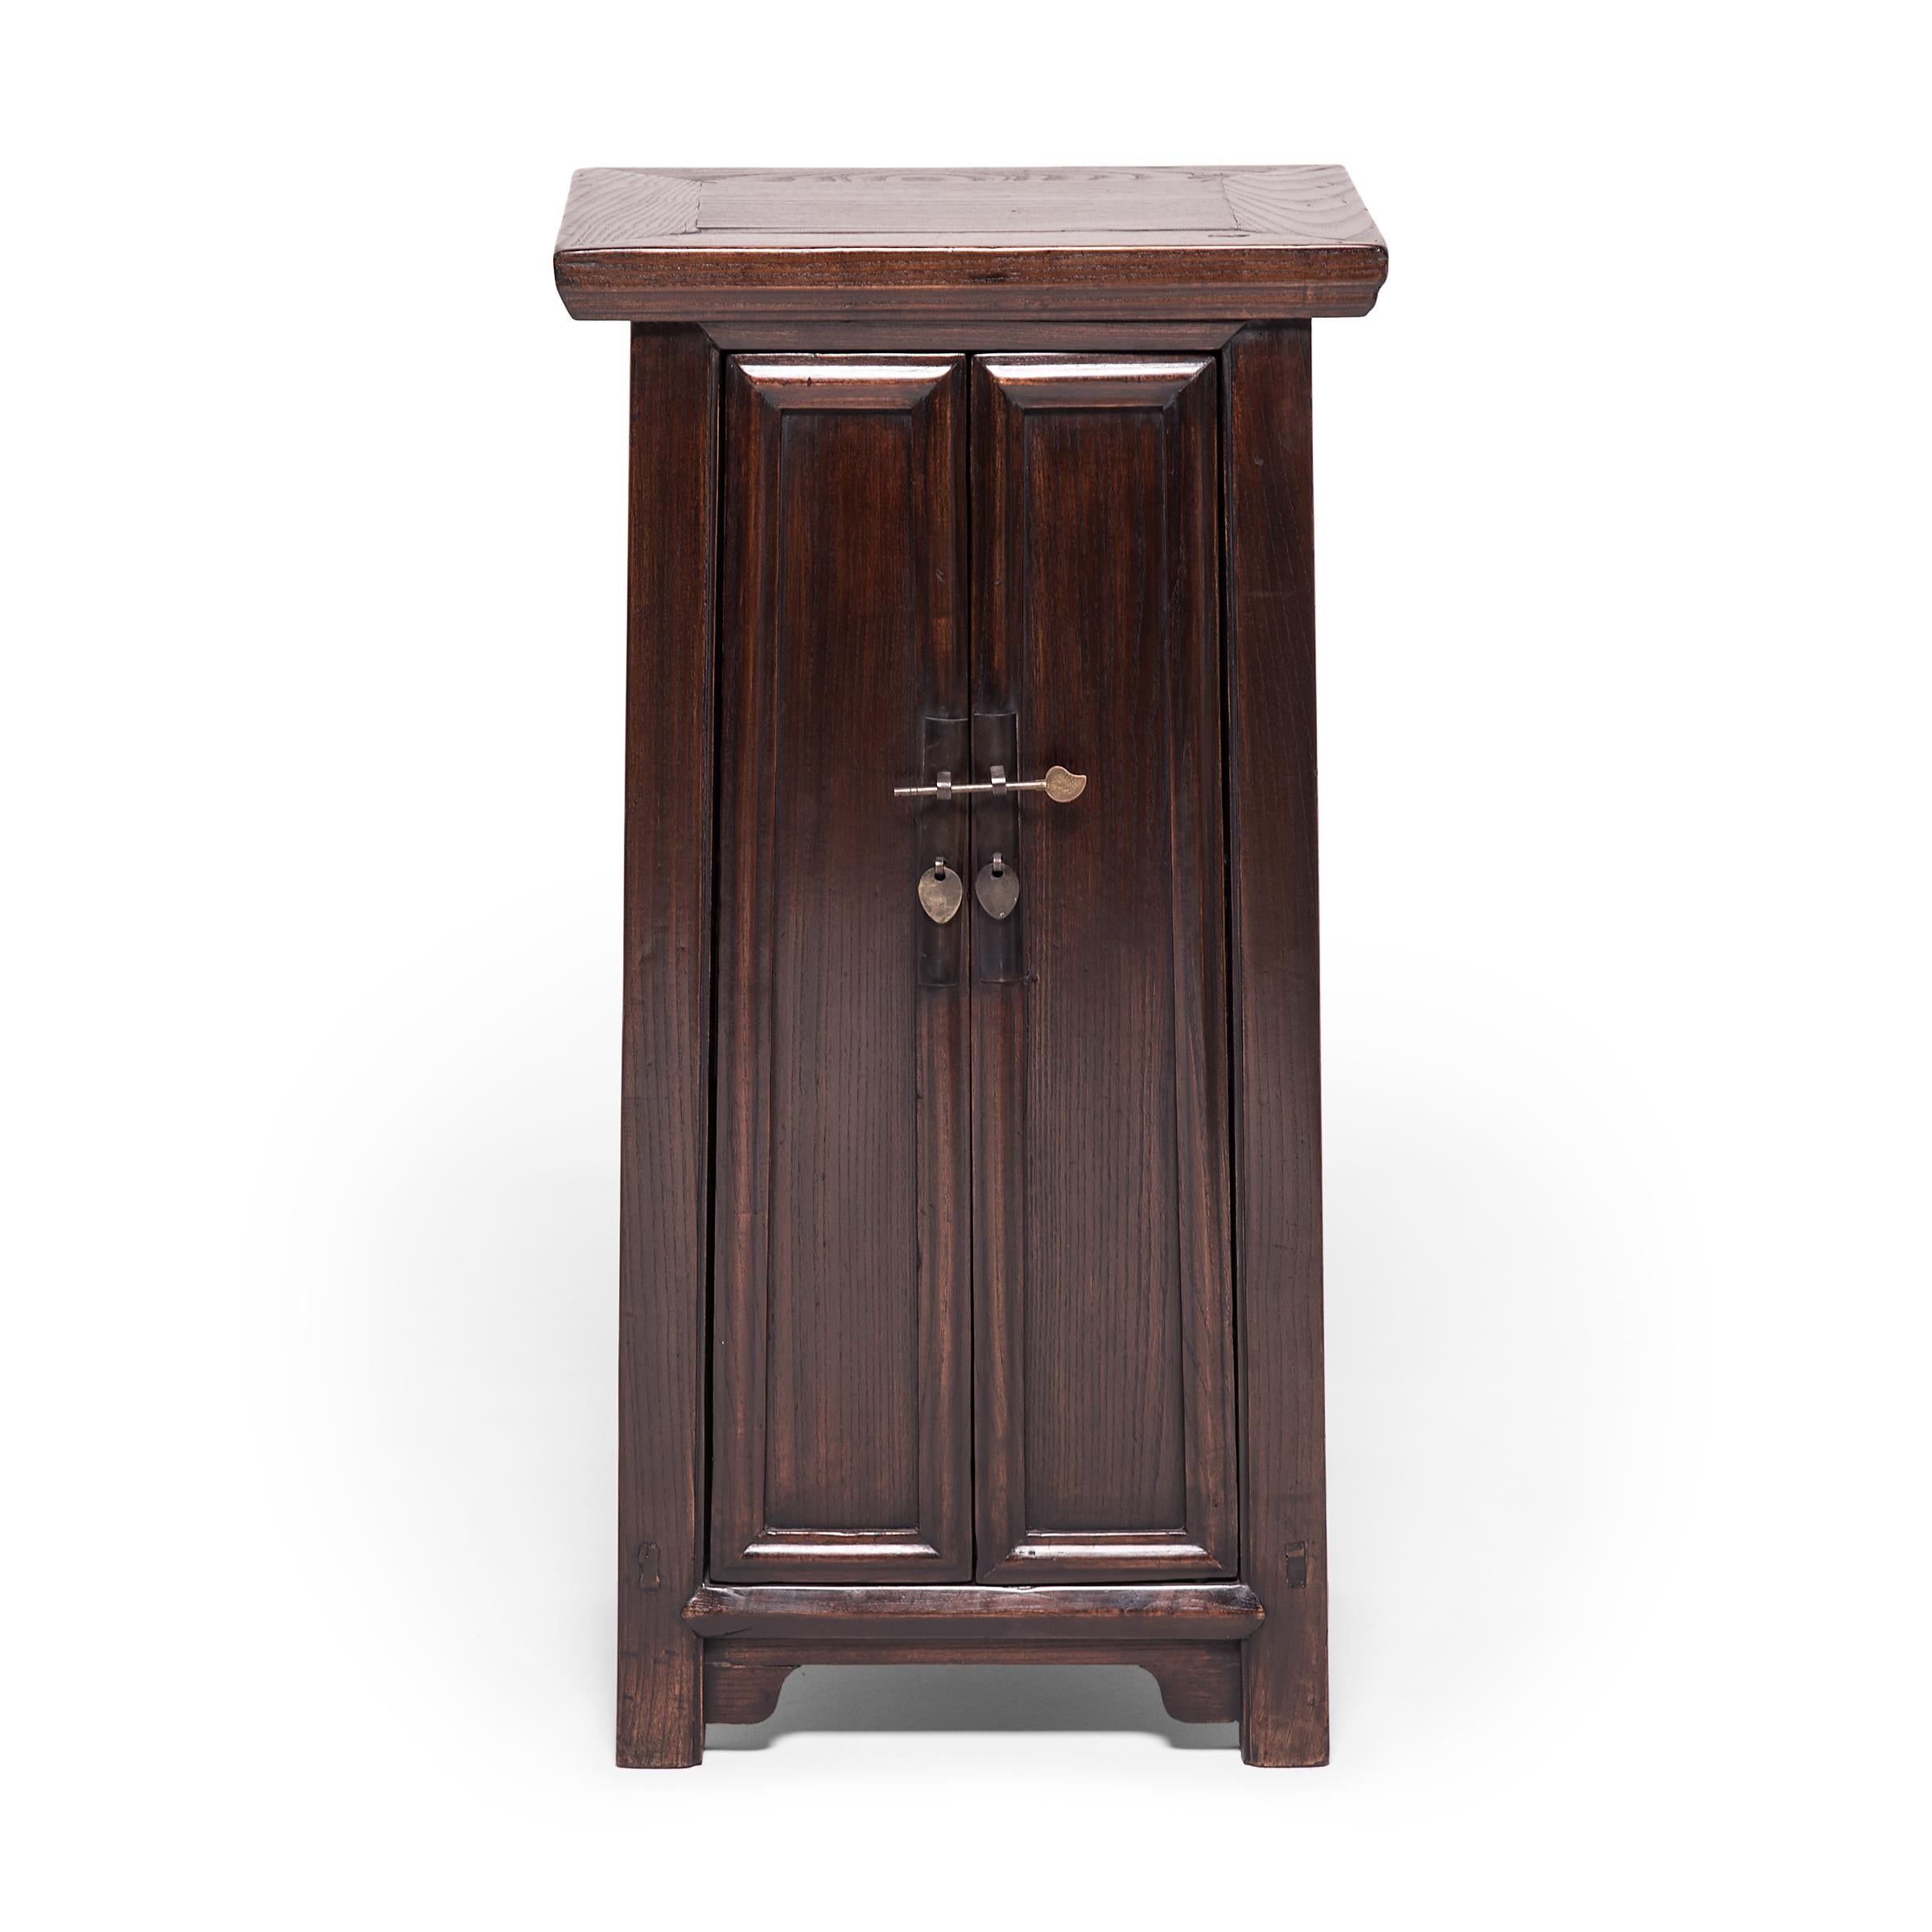 This striking pair of petite elmwood cabinets was constructed in the early 20th century by an artisan in China's Shanxi province. Called “noodle” for the rounded wood molding that outlines its doors and frame, the cabinets have an austere beauty,